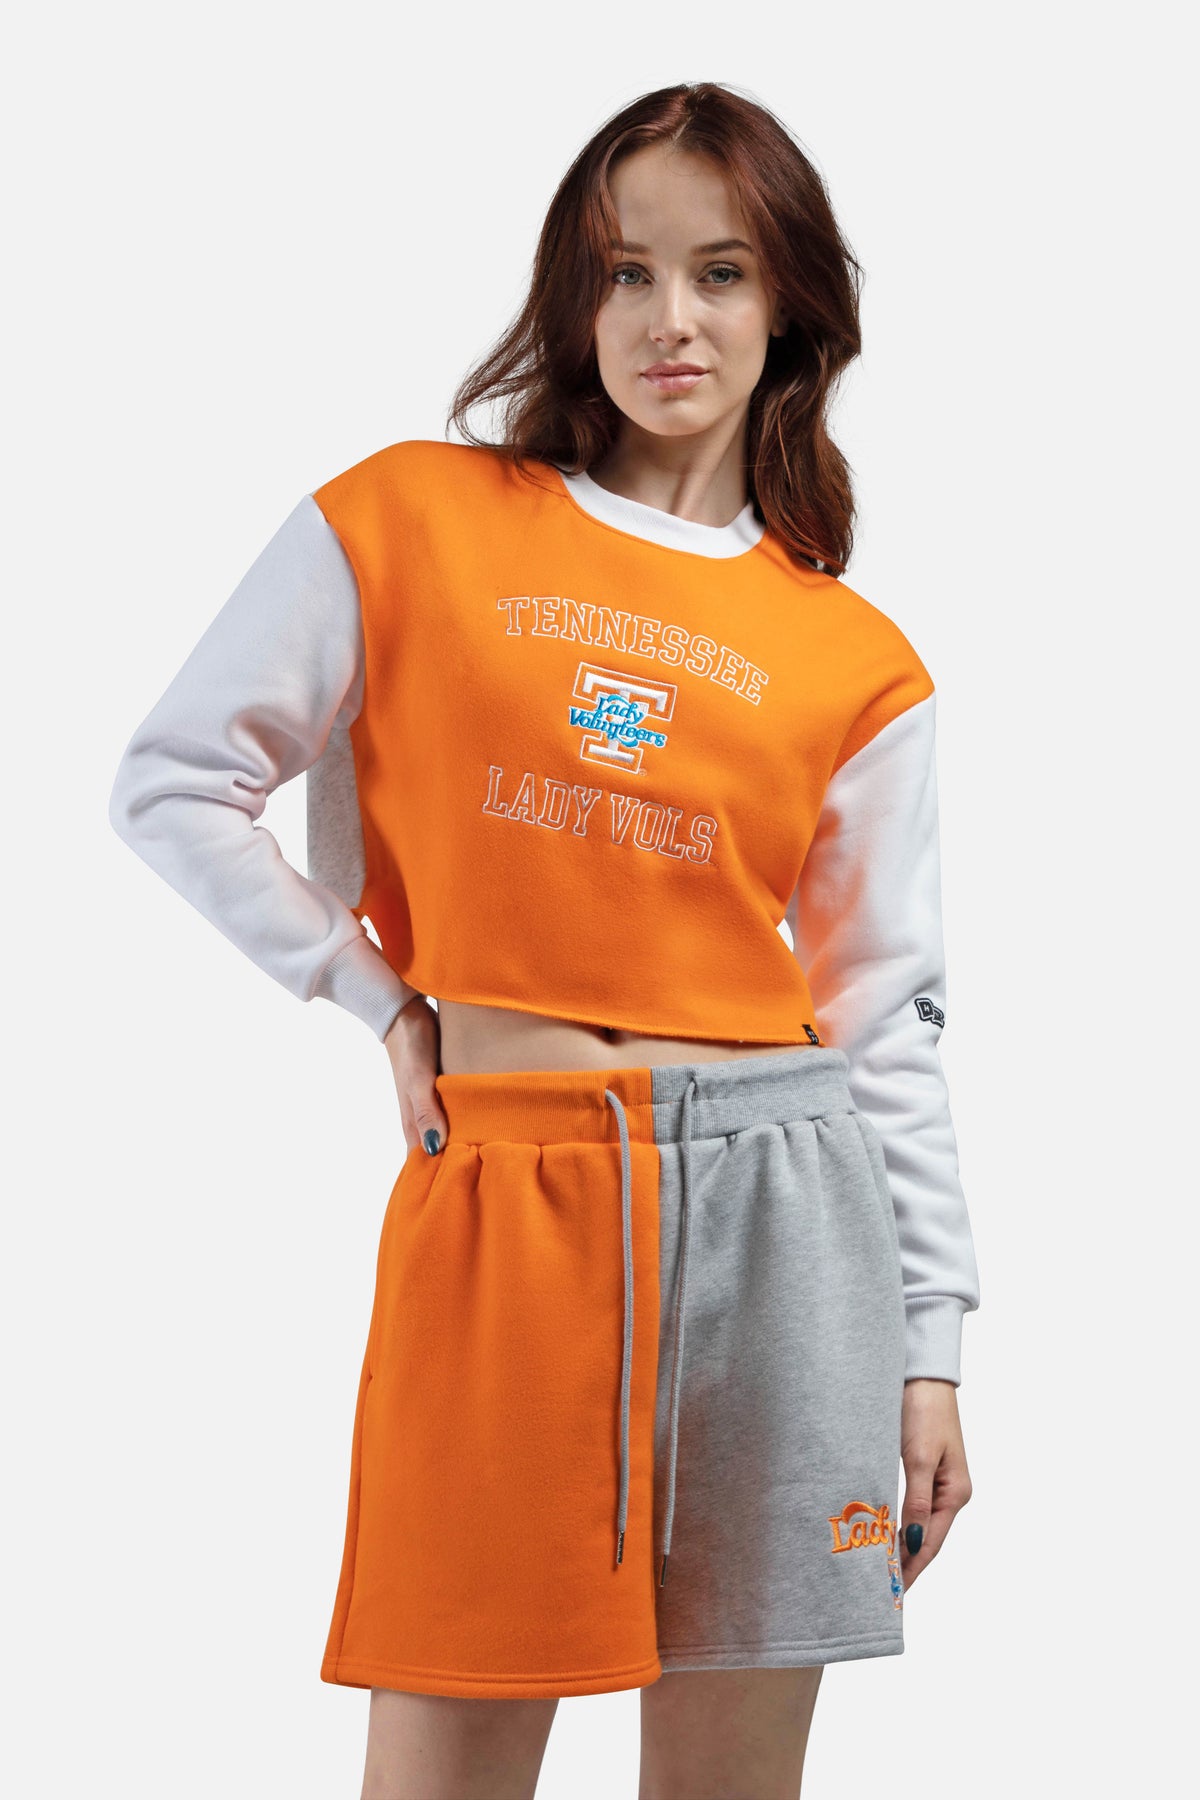 Tennessee Lady Vols Rookie Sweater